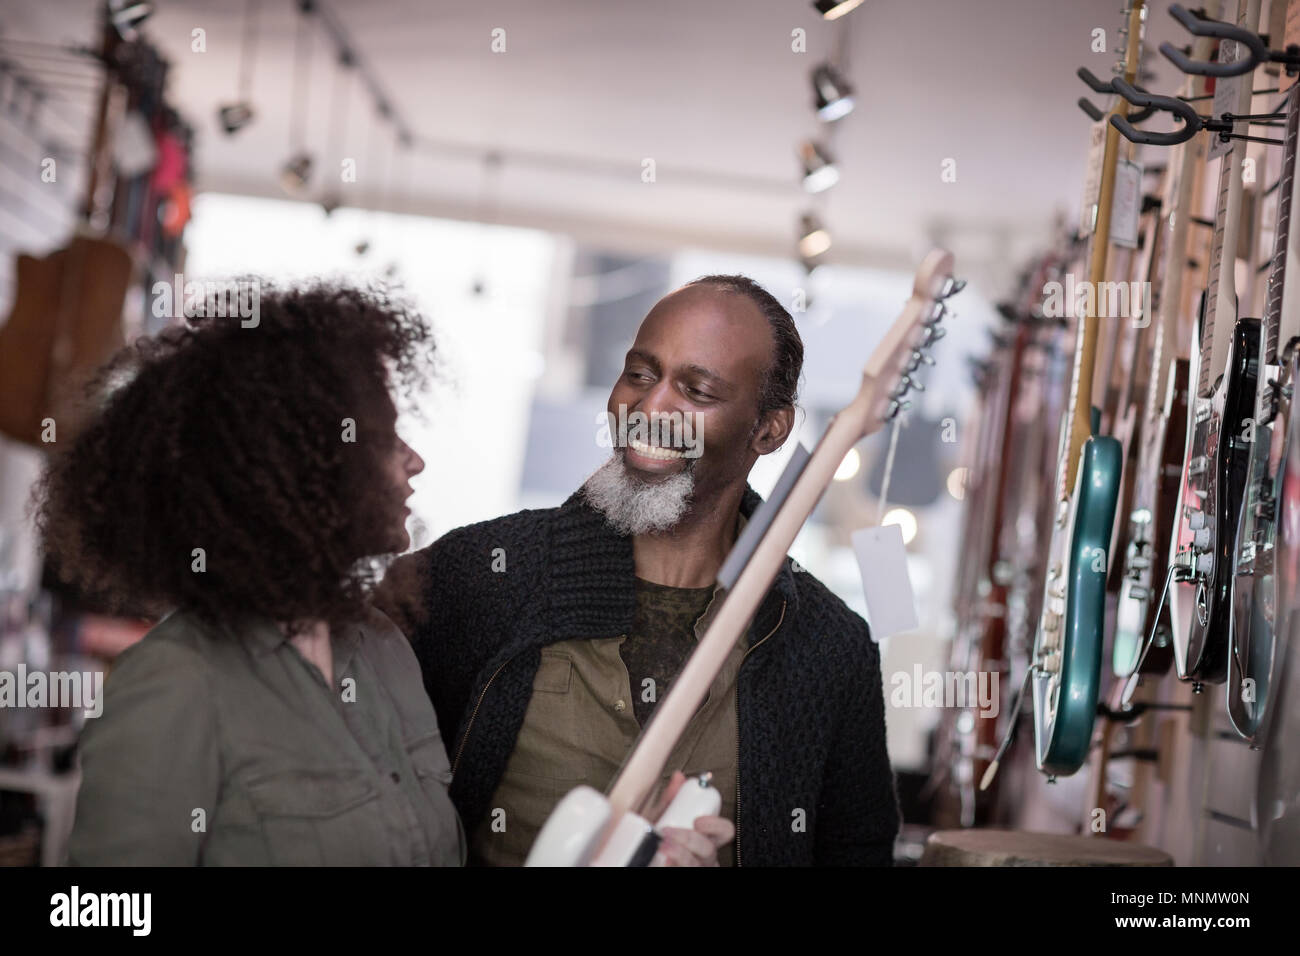 Small business owner helping customer in a guitar store Stock Photo